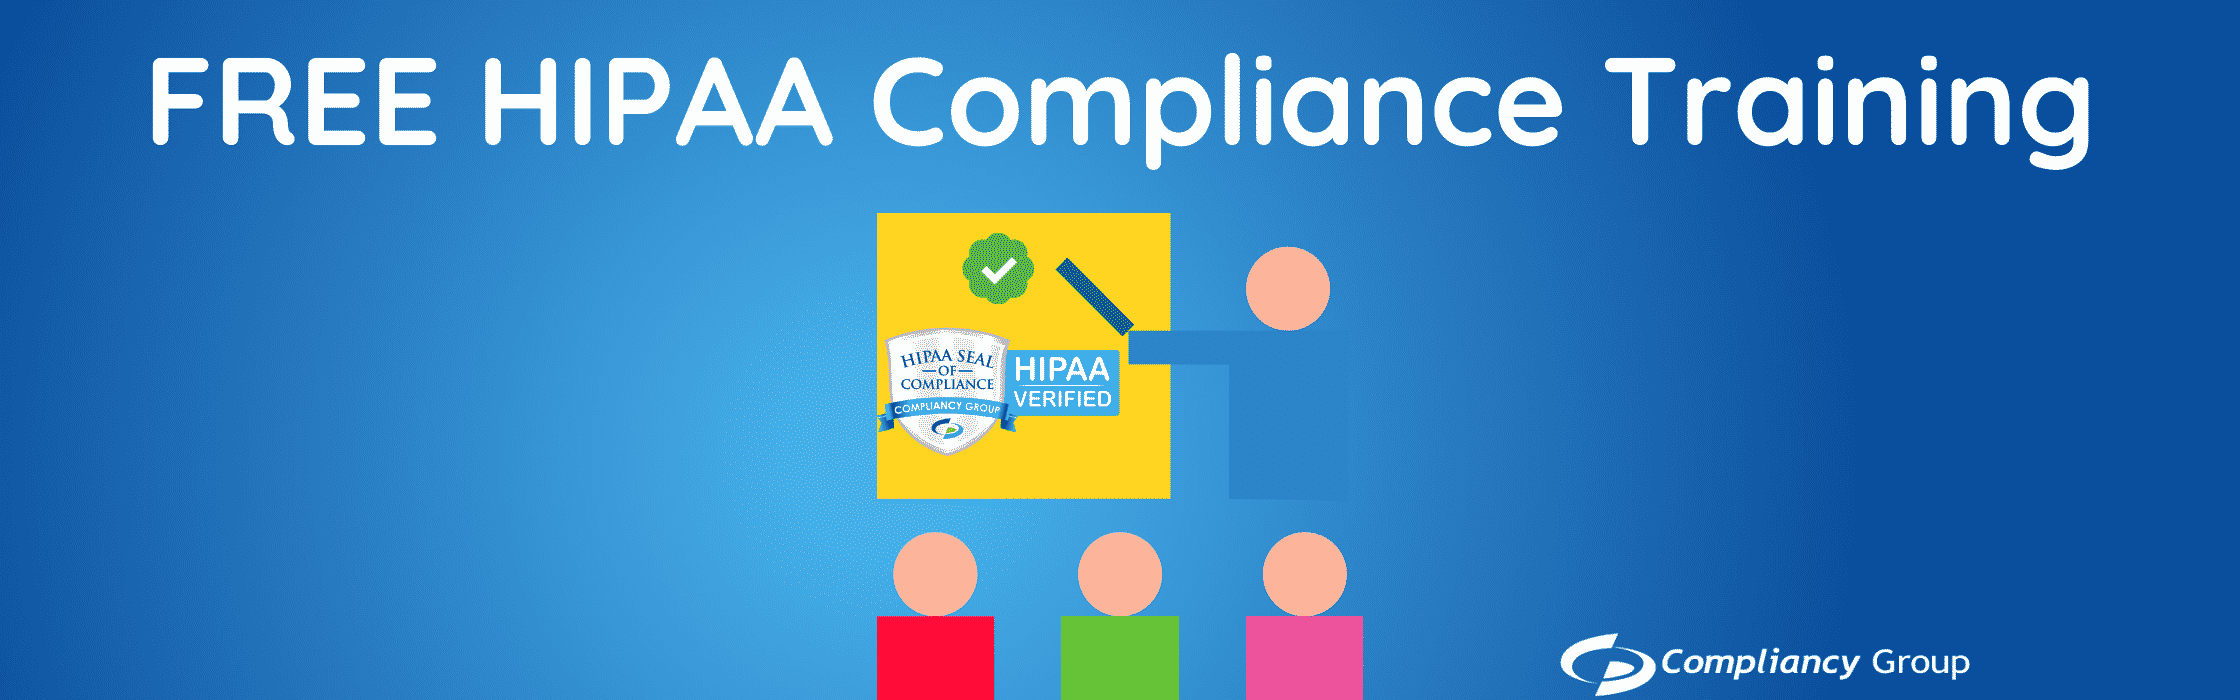 HIPAA Compliance Training Requirements (for Free!)